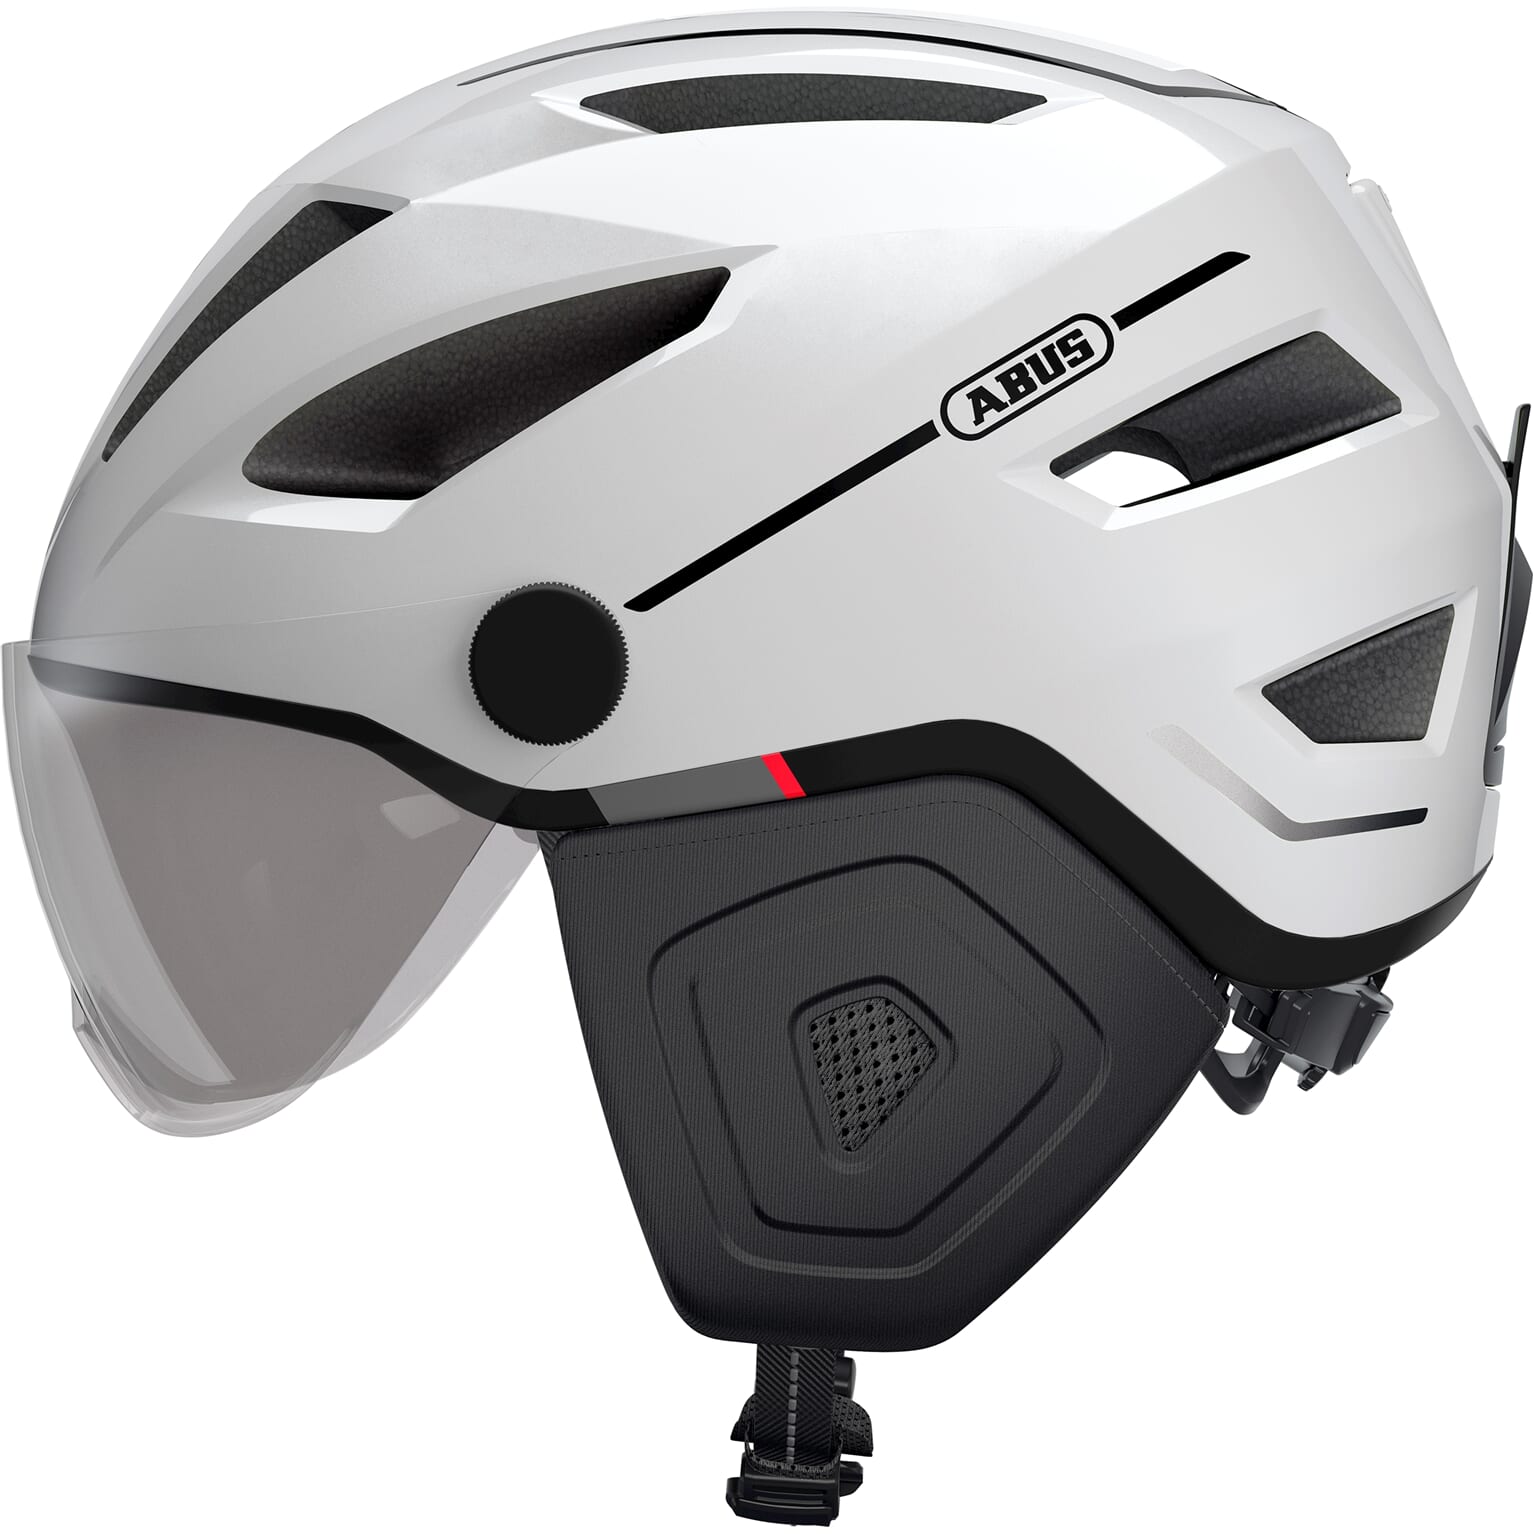 Abus helm Pedelec 2.0 ACE pearl white S 51-55cm